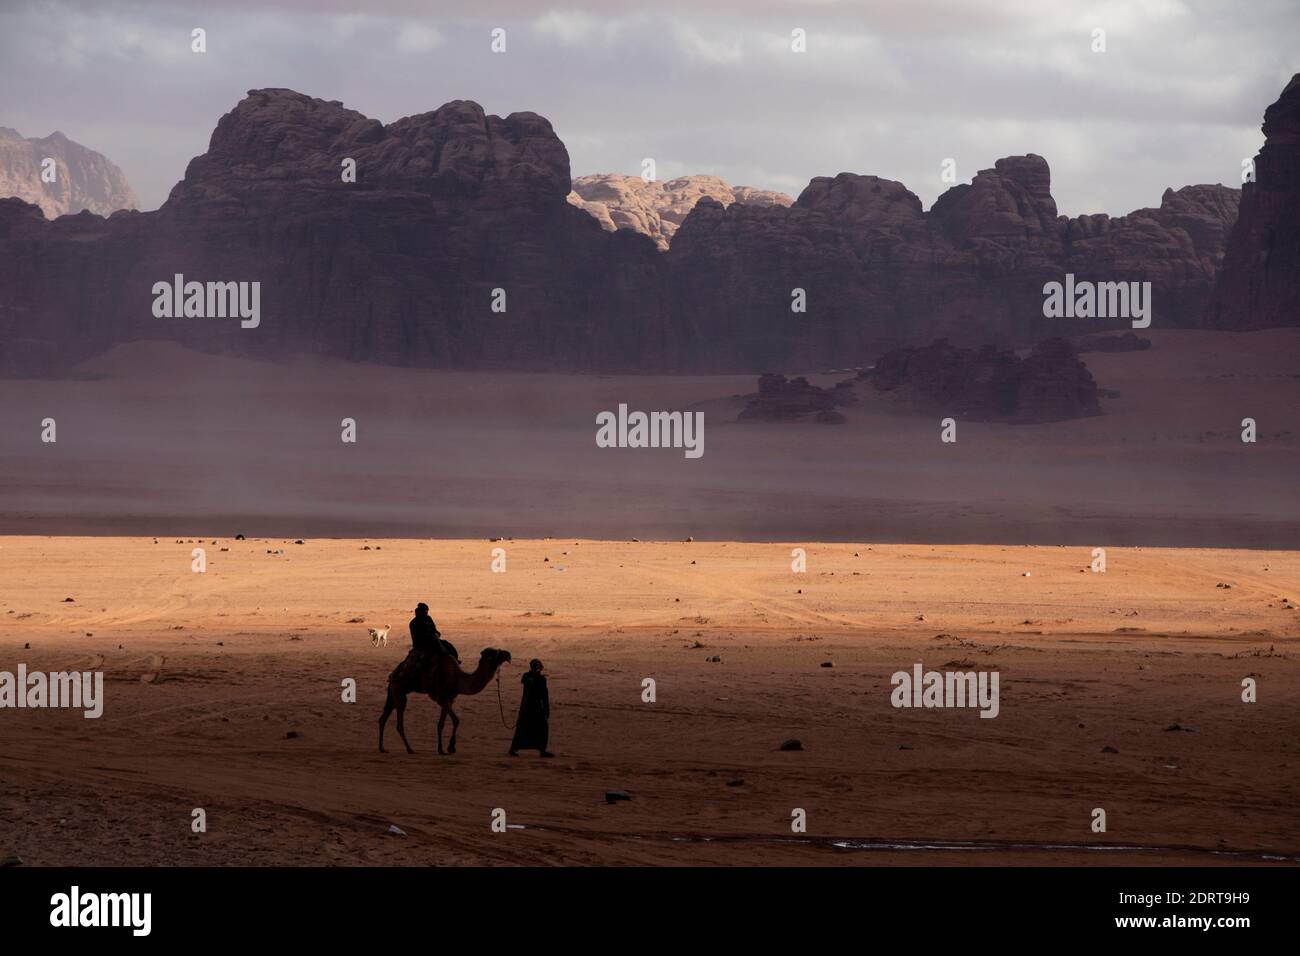 Bedouins and iteir camel at sunset in the desert of Wadi Rum, Jordan, just a few weeks before the global lockdown Stock Photo